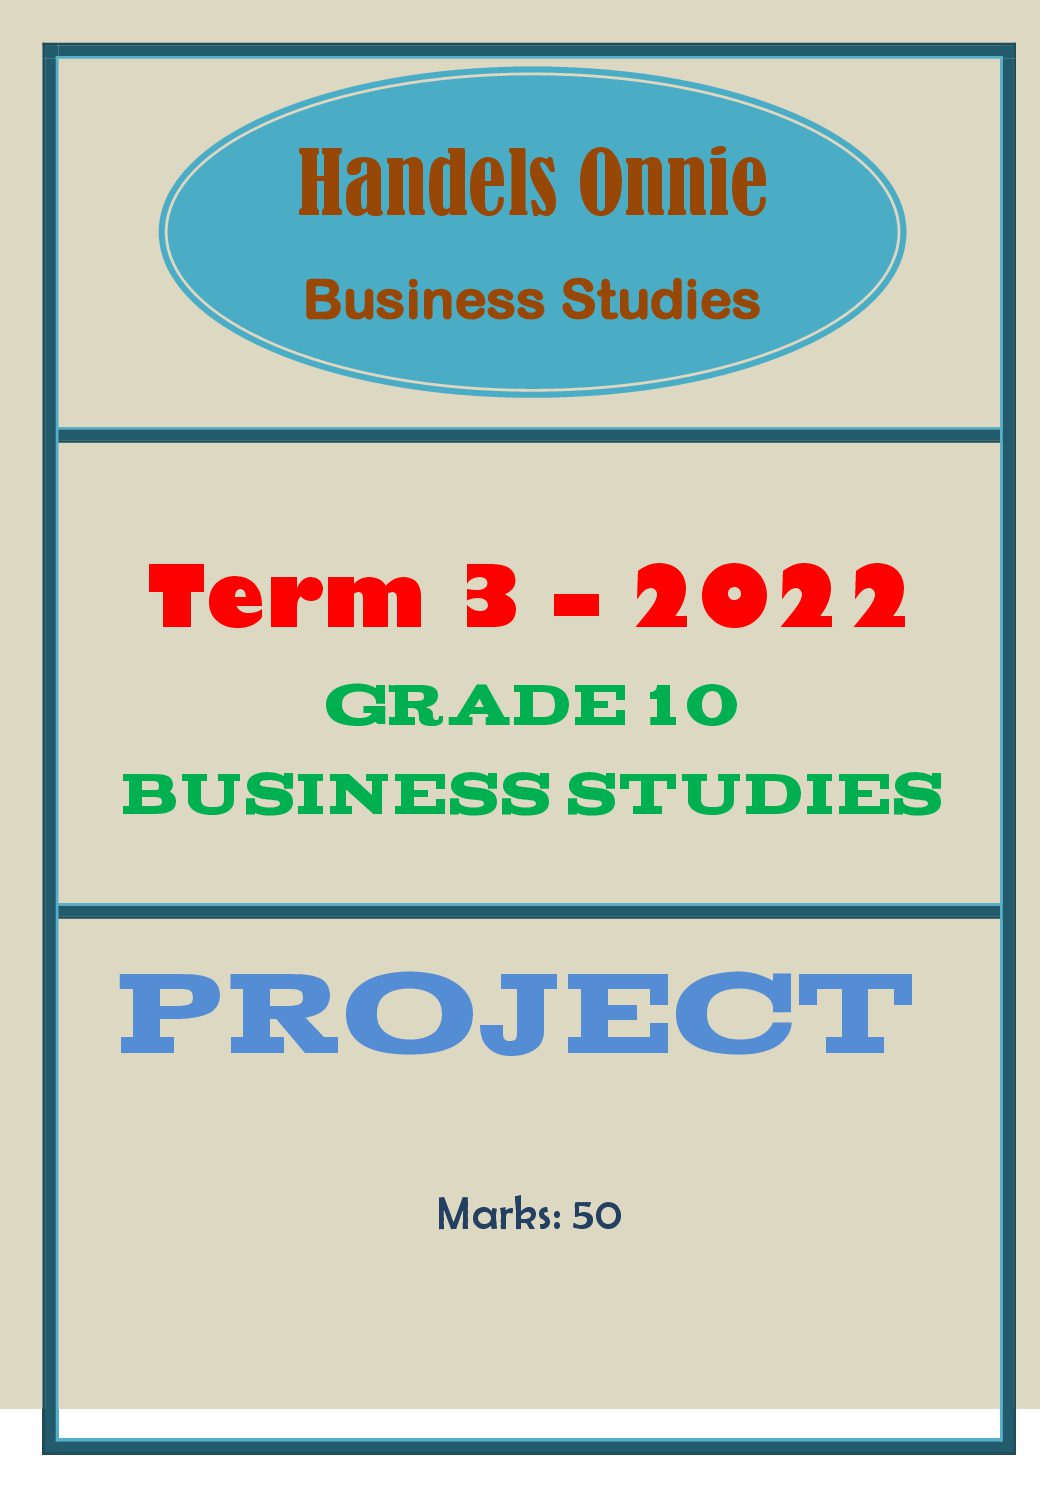 business studies research project term 3